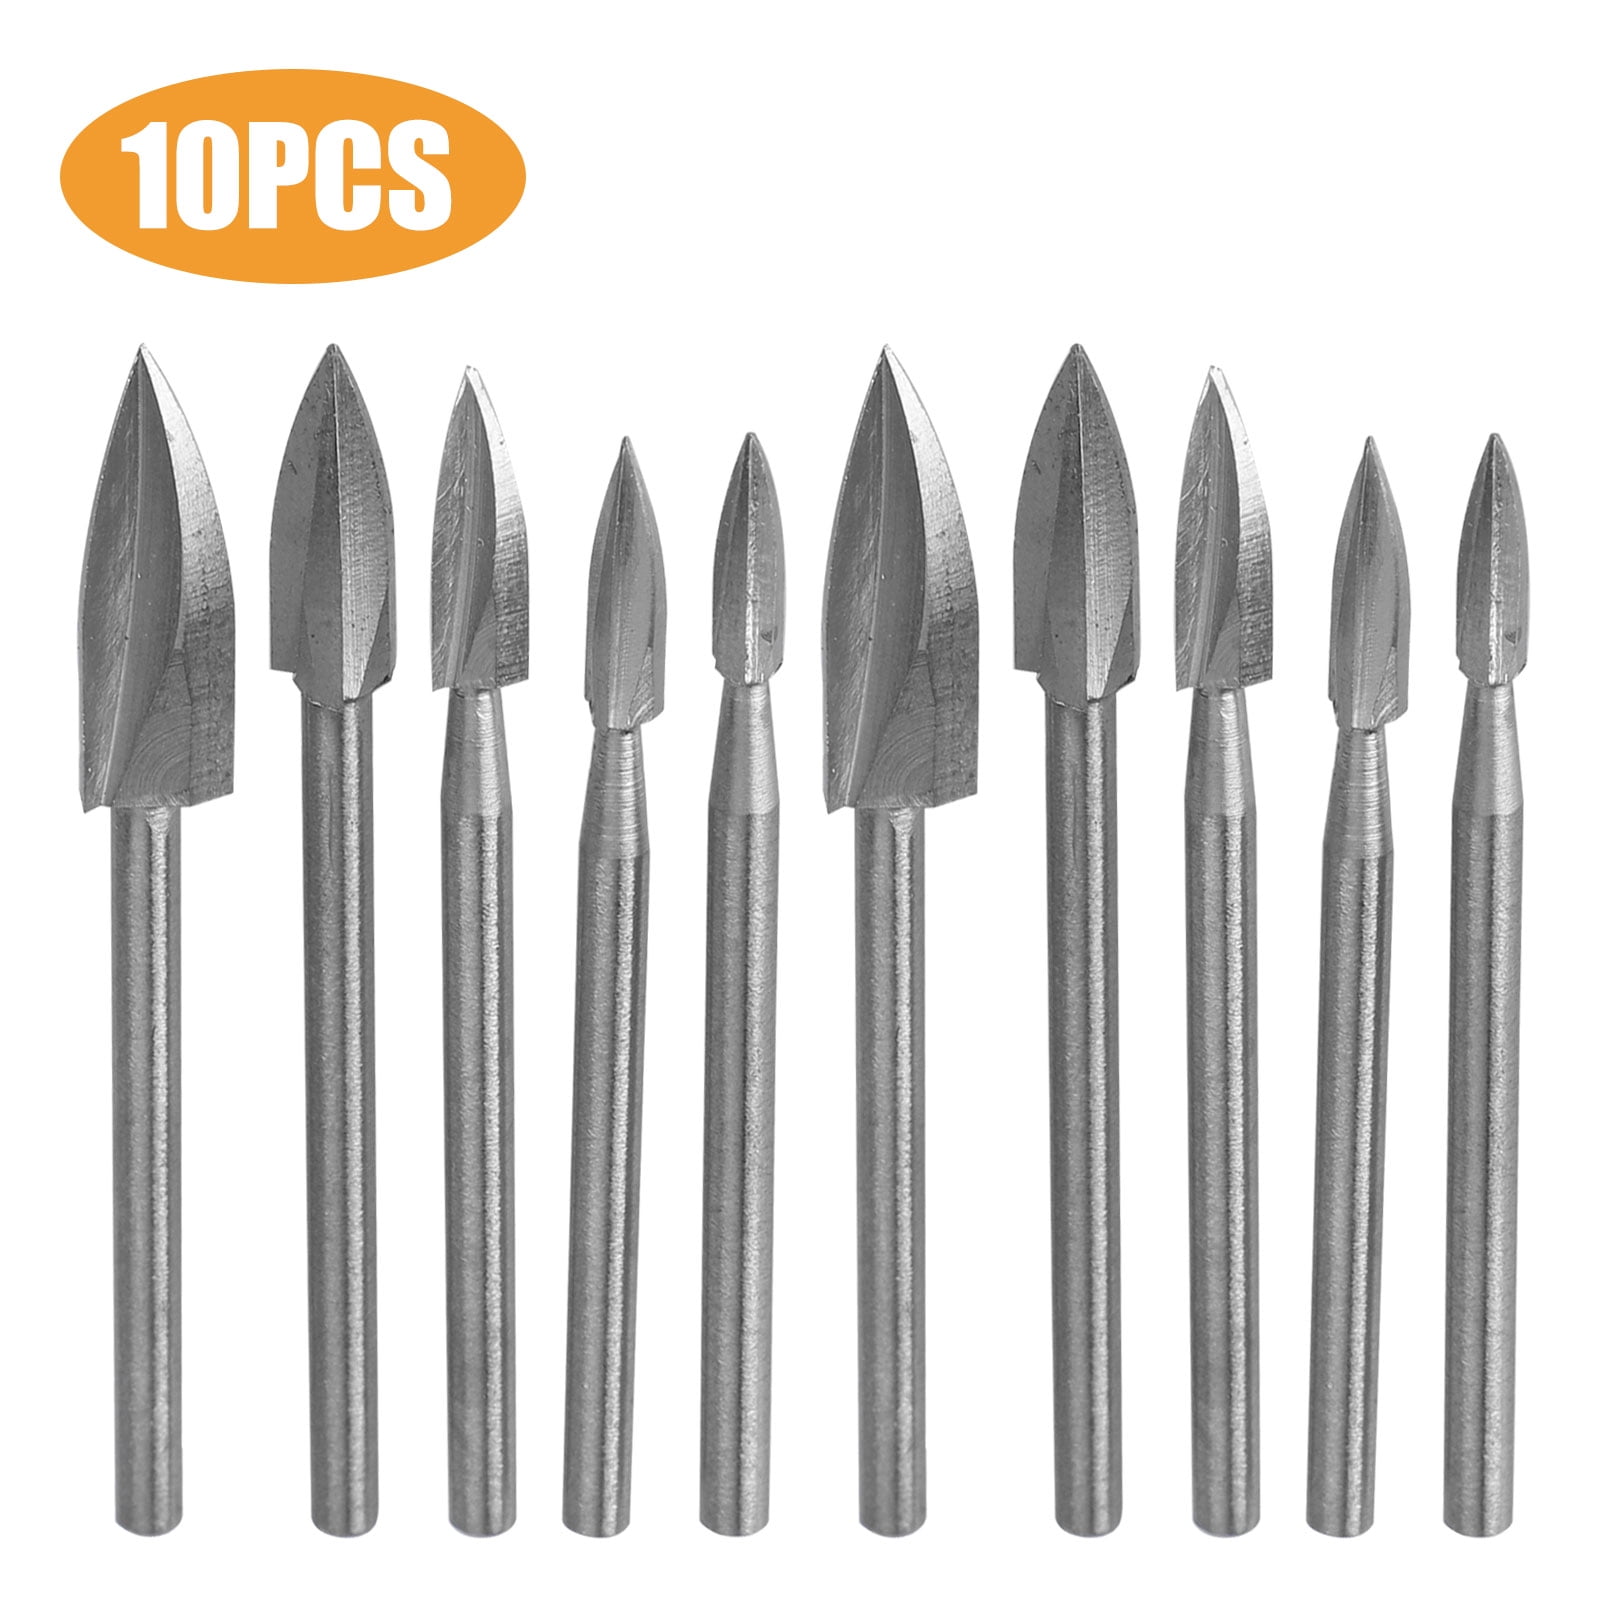 5-piece Set Steel Cutter Tool For Rotary Workshop Wood Carving Tools 3/4/5/6/8mm 